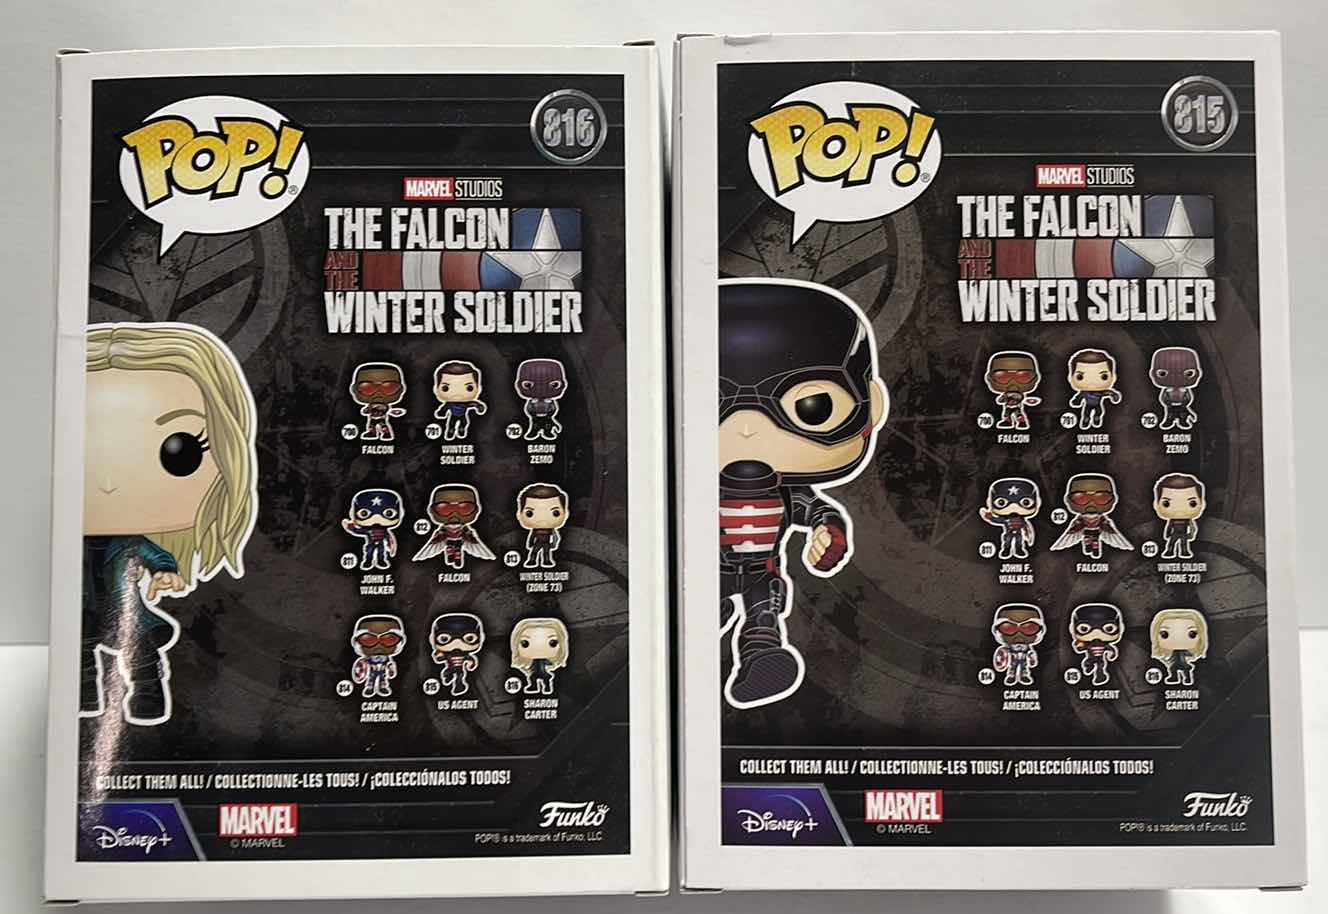 Photo 2 of NIB FUNKO POP MARVEL SERIES THE FALCON WINTER SOLDIER
"SHARON CARTER & US AGENT”
TOTAL RETAIL PRICE $26.99